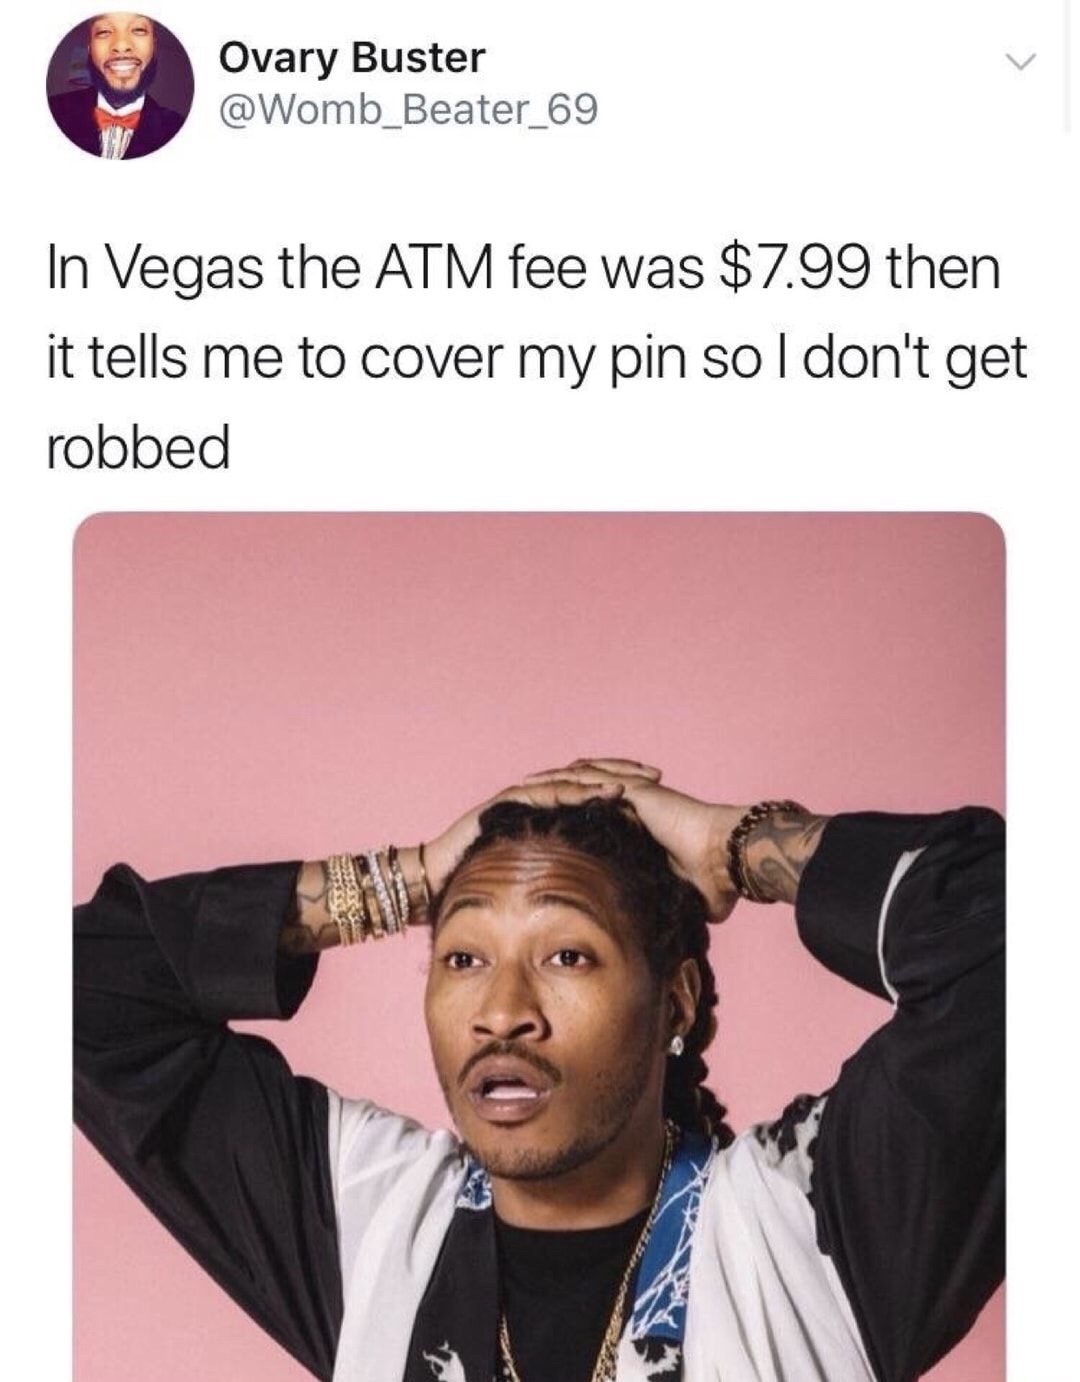 memes - future meme rapper - Ovary Buster In Vegas the Atm fee was $7.99 then it tells me to cover my pin so I don't get robbed